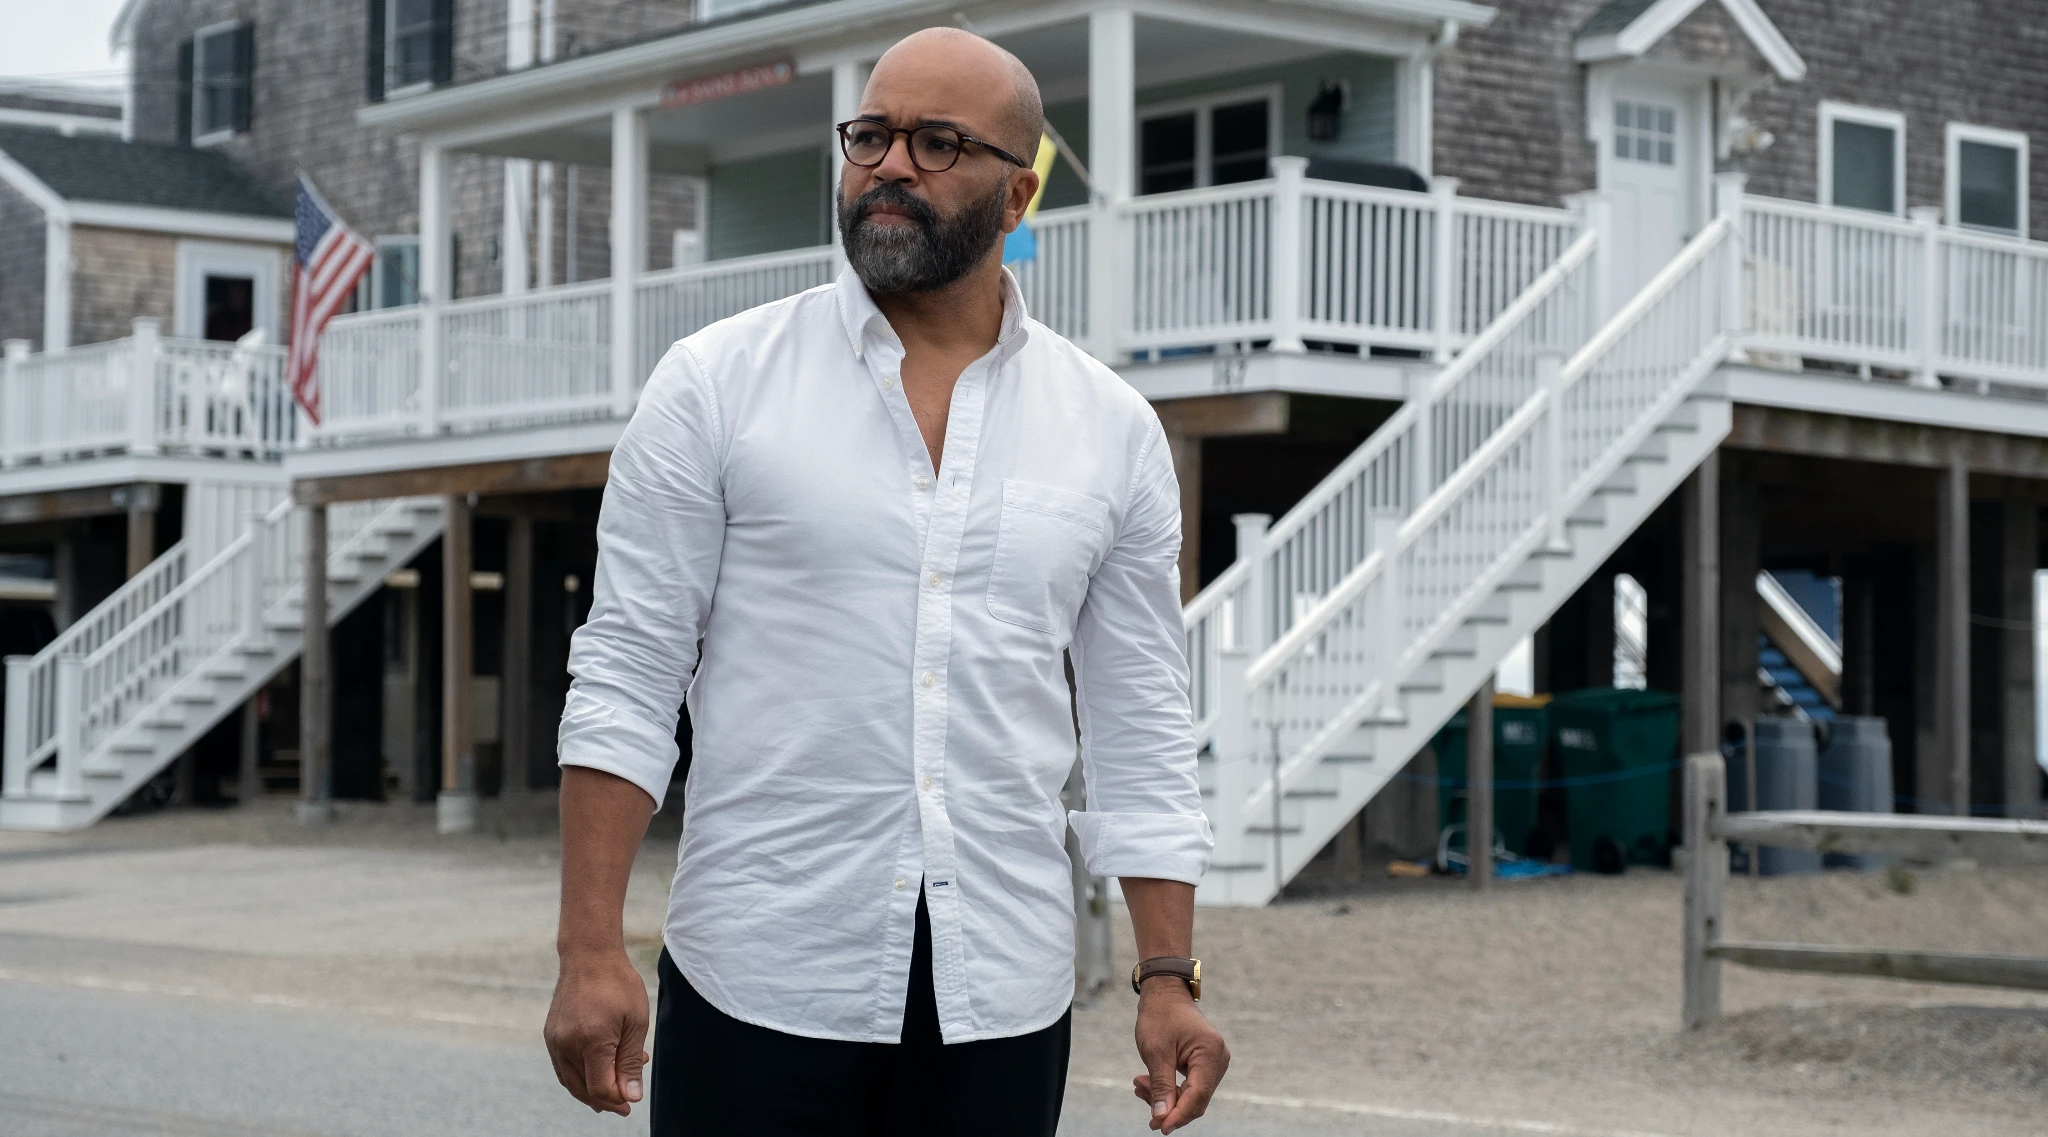 'American Fiction' Trailer: Jeffrey Wright, Issa Rae and Sterling K. Brown Take on Offensive Stereotypes